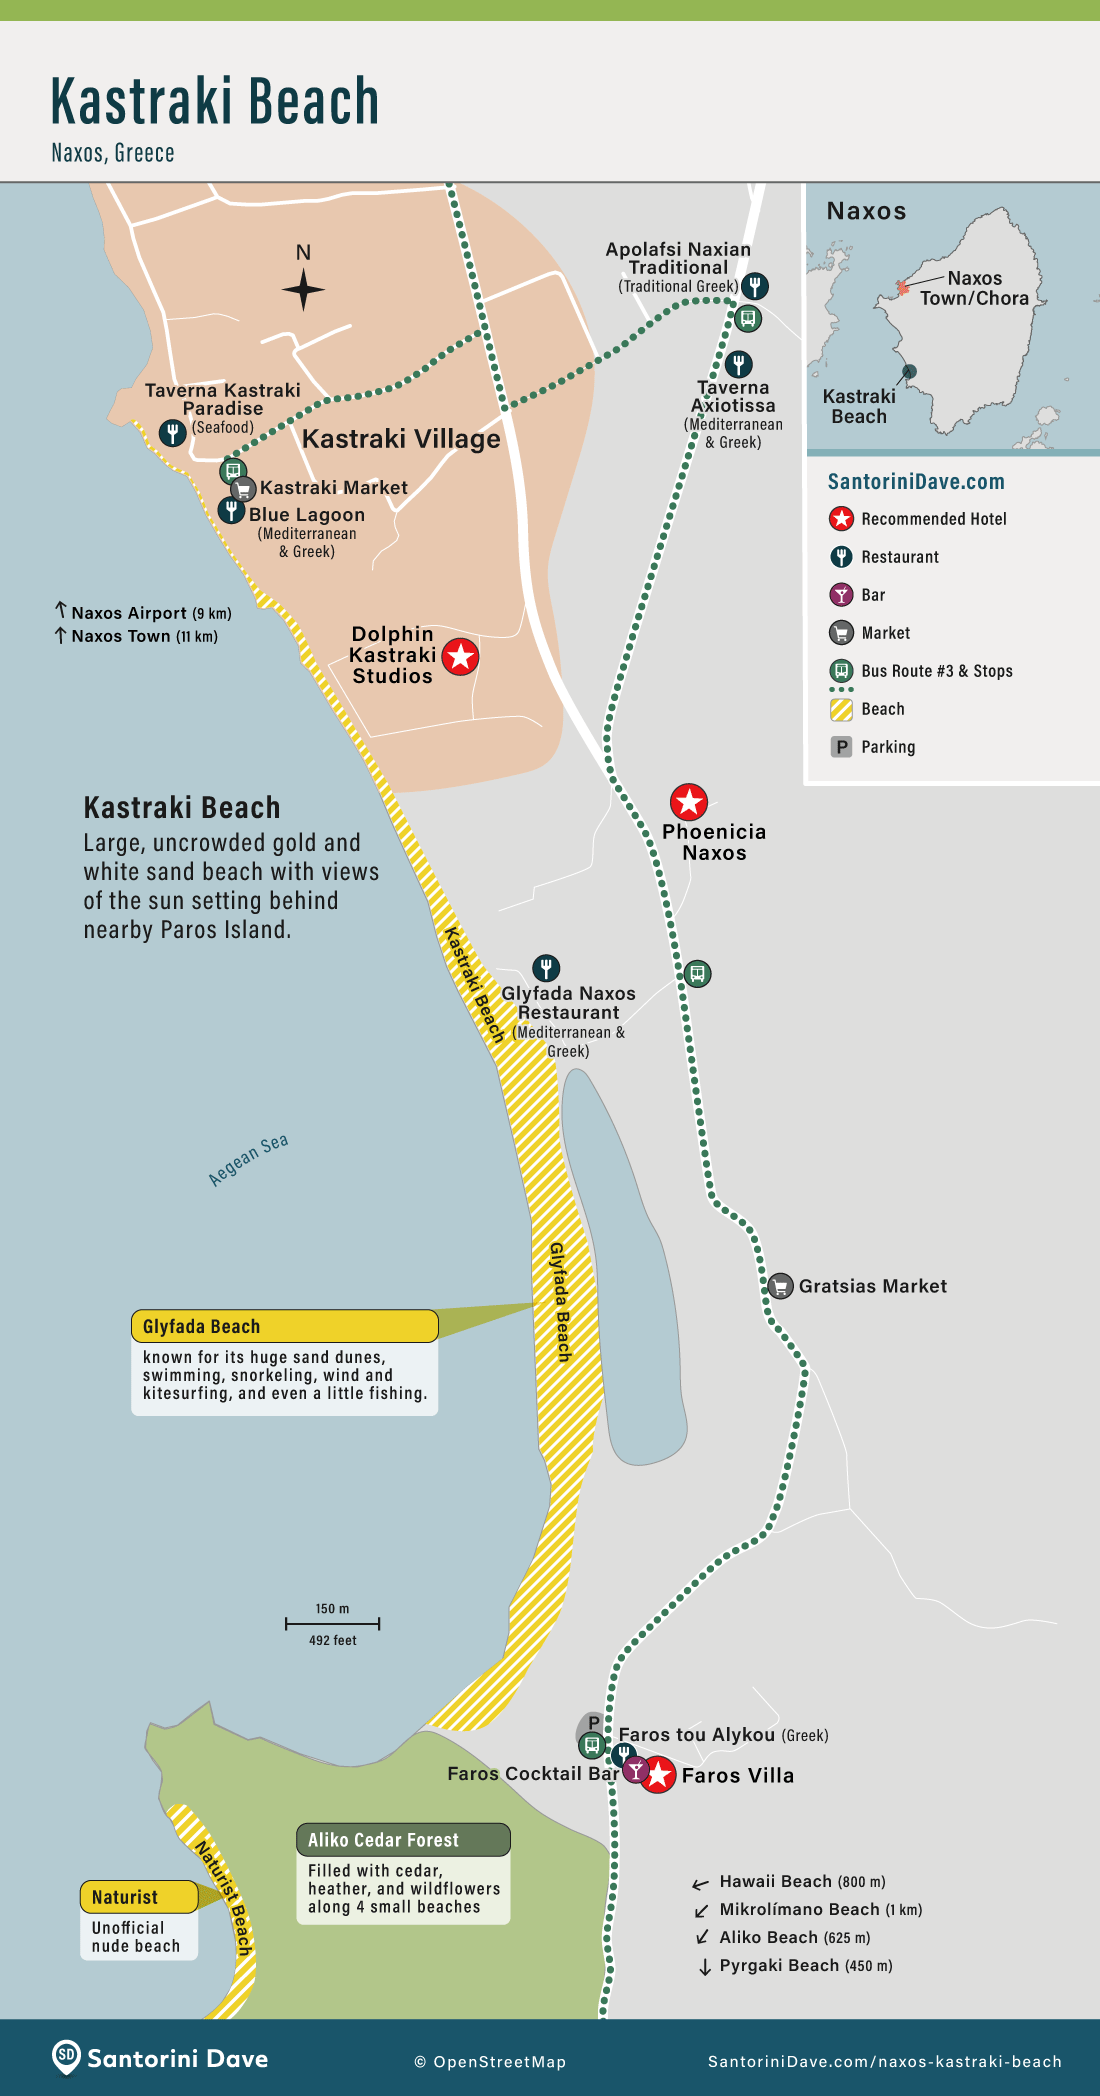 Map showing the best hotels and restaurants at Kastraki Beach on the island of Naxos